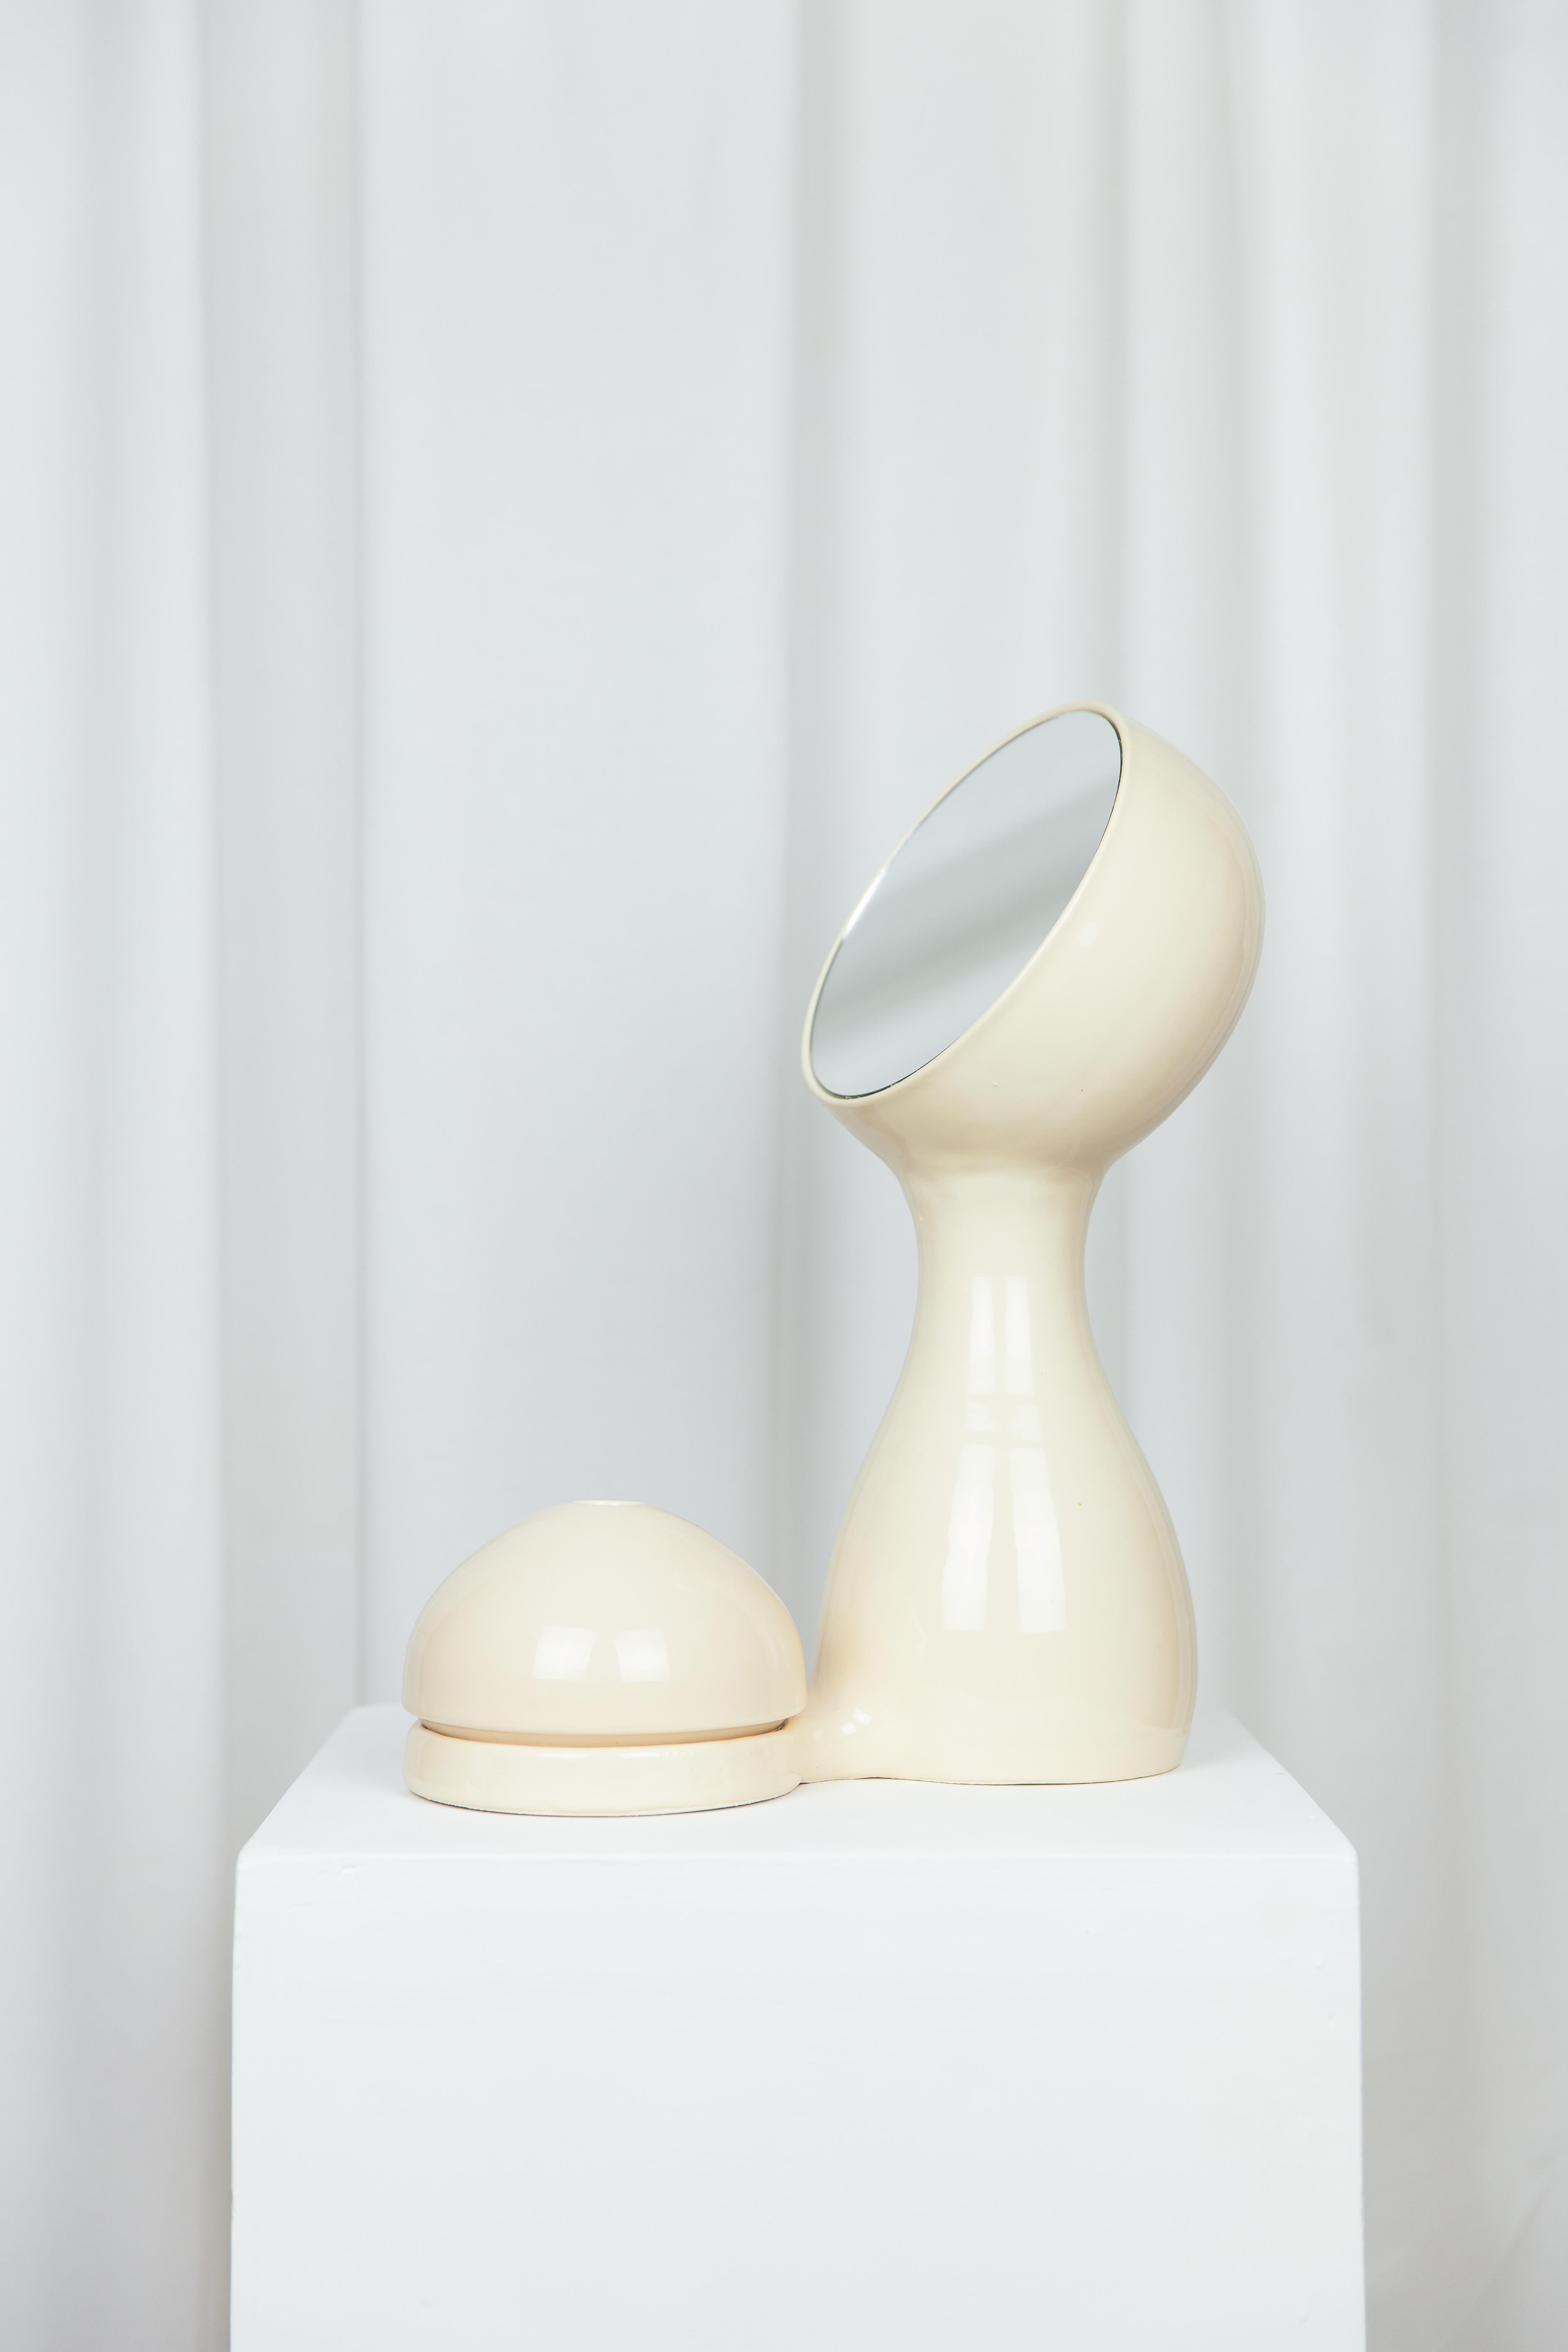 Wit mirror + vase Beige by Lola Mayeras
Dimensions: D 25 x W 16 x W 36 cm
Materials: Earthenware, mirror

Mirror with detachable vase in white earthenware, glazed in beige. This piece is designed and handcrafted in the south of France.

Lola